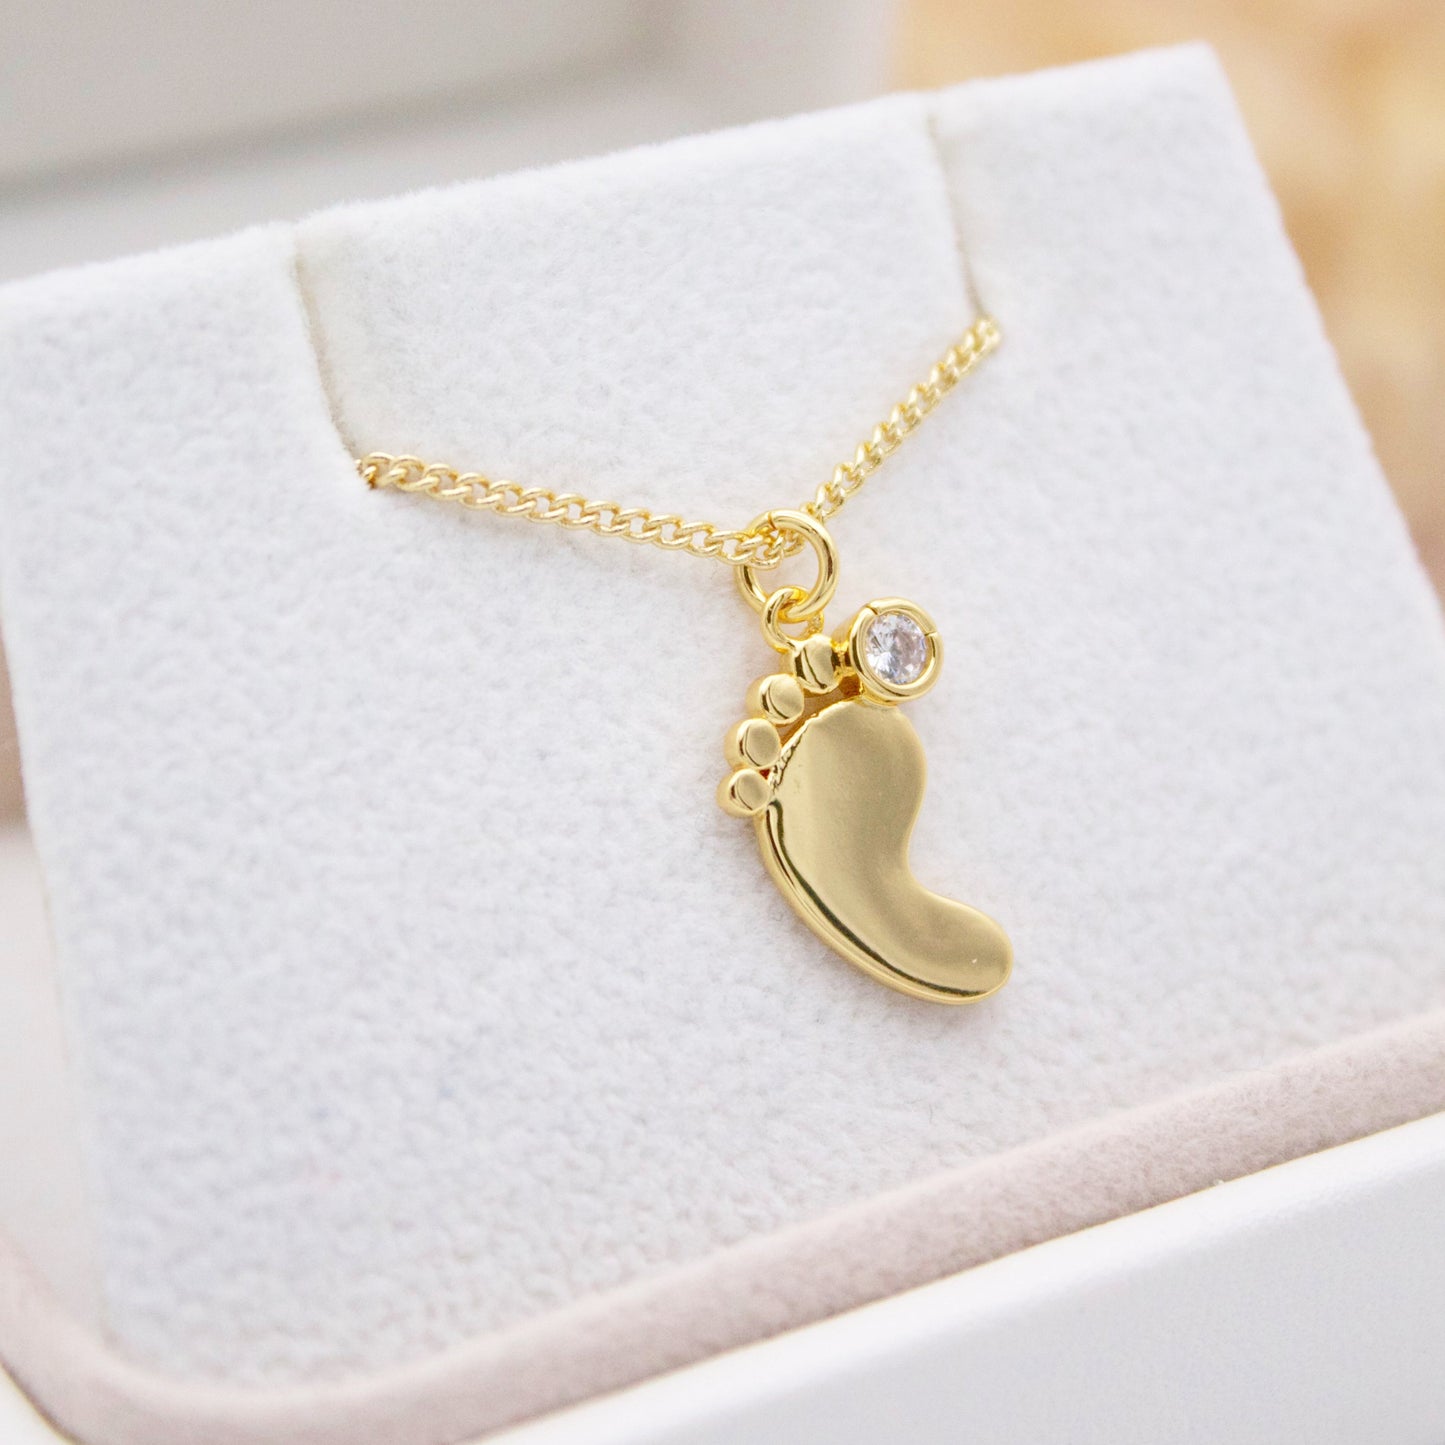 Baby Foot Necklace